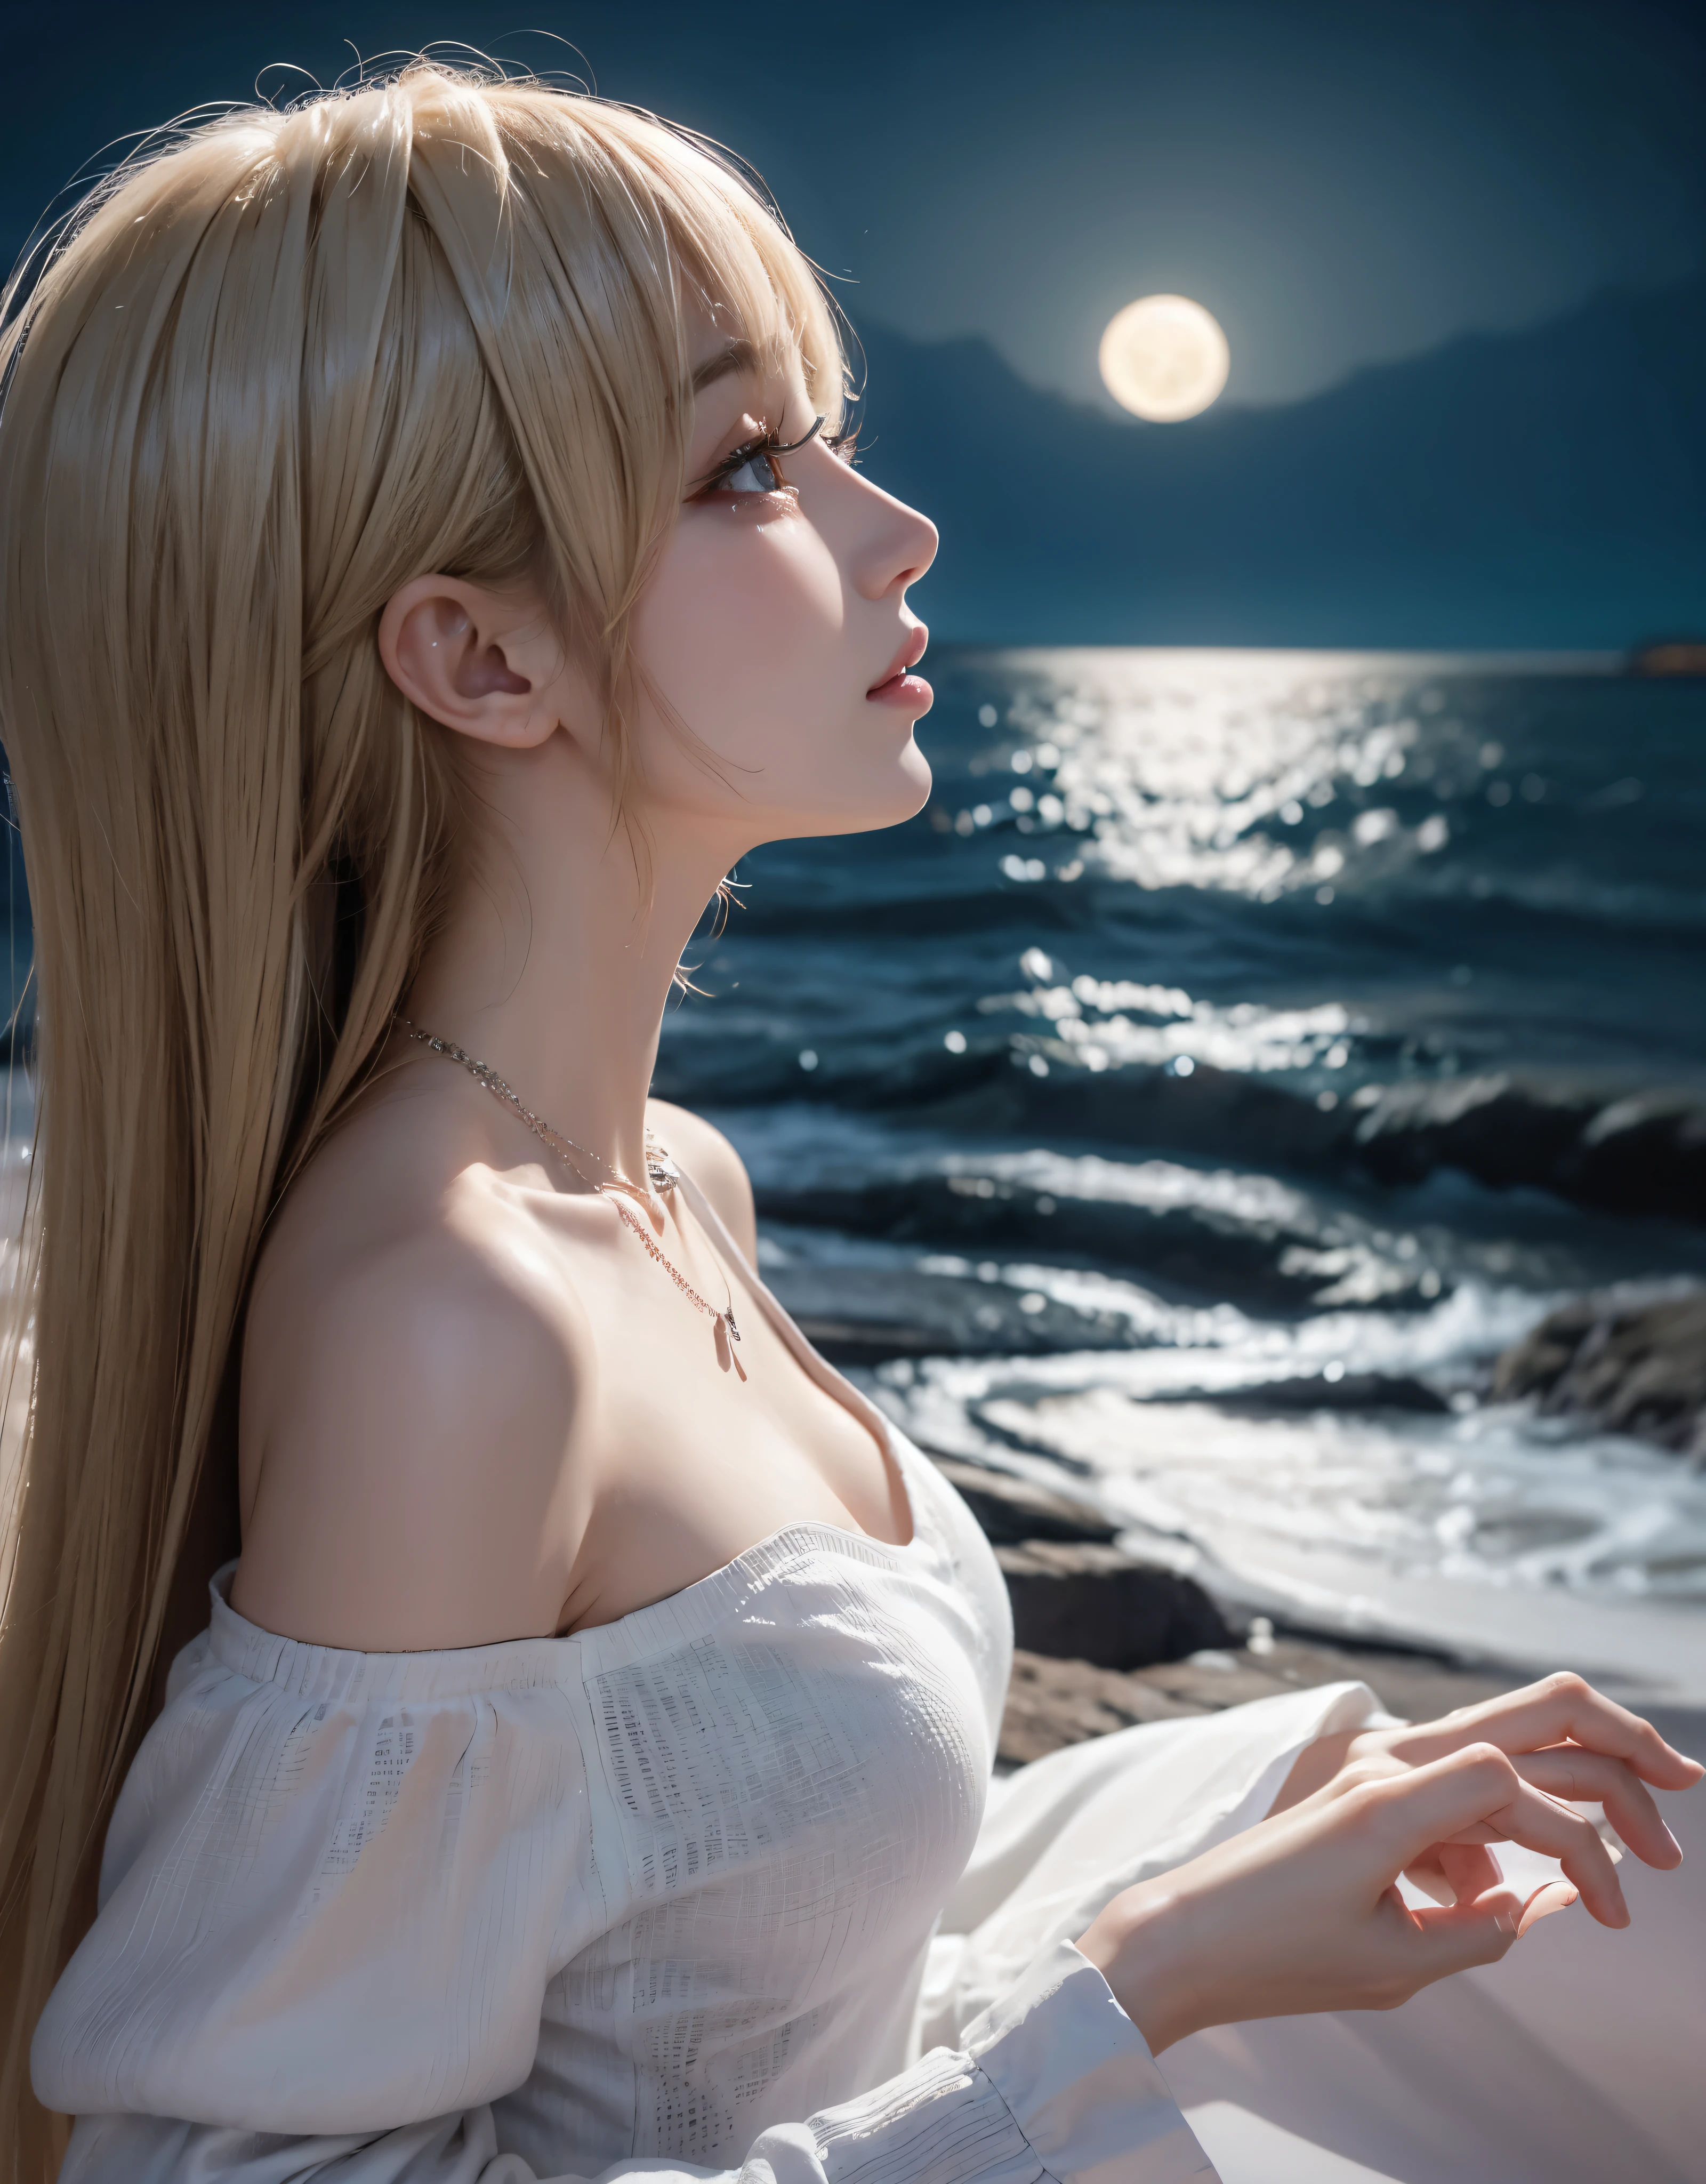 Beautiful eyes and face、An ultra-high picture quality、8K、Smart body、High Style、About 24 years old、Detailed eyes、Detailed skin、Crystal clear white skin、Off shoulder dresiddlebreasts、simple background、((skin whitening))、a necklace、Beautiful collarbone,(((Lonely profile)))、((Coast at night))、((face that seems to cry))、Anxious face、(moonlights)、